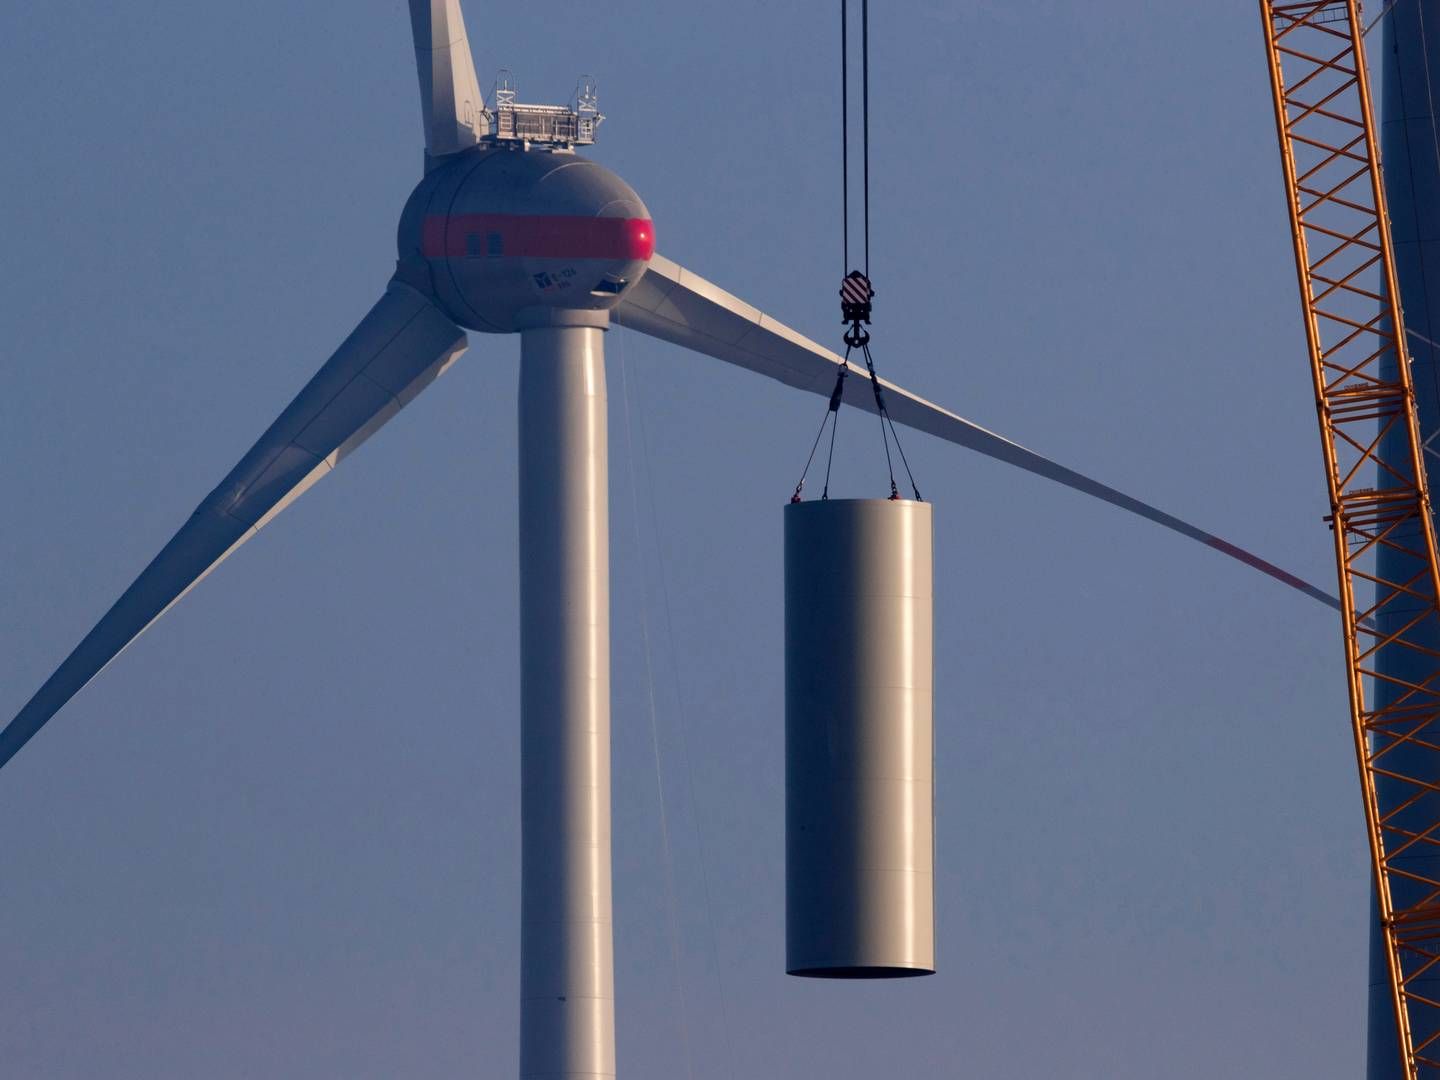 New turbine constructions - especially offshore - are hit the hardest by the downturn in the wind sector, according to pension funds | Photo: Jens Bttner/AP/Ritzau Scanpix